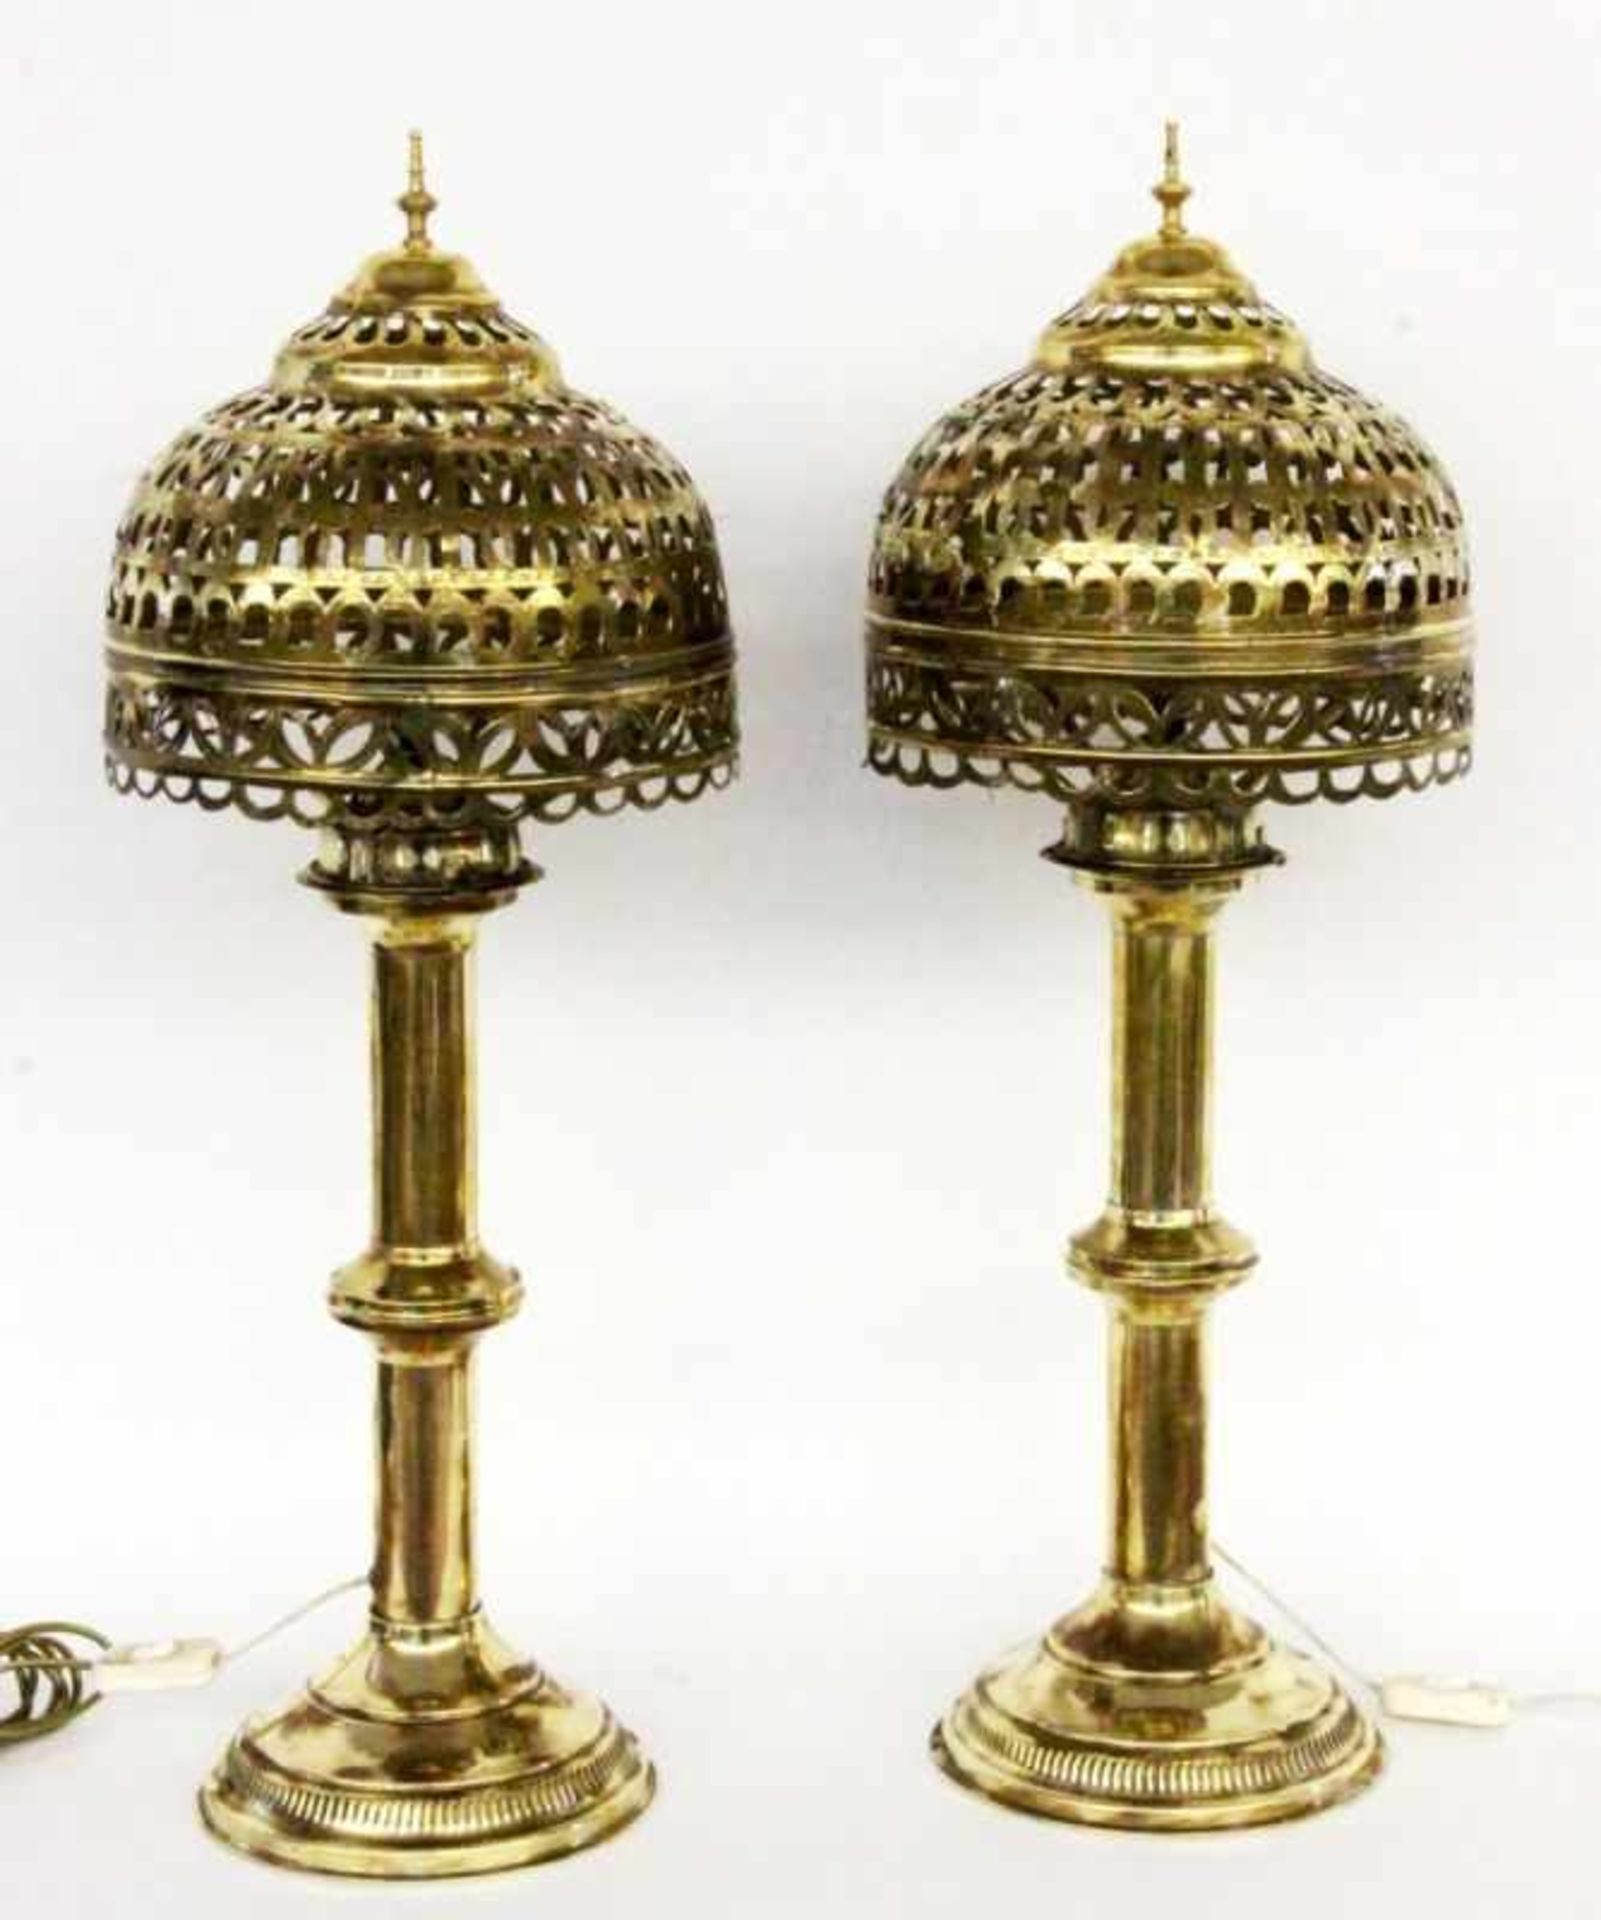 A PAIR OF TABLE LAMPS IN ORIENTAL STYLE Brass, electrified. 75 cm high